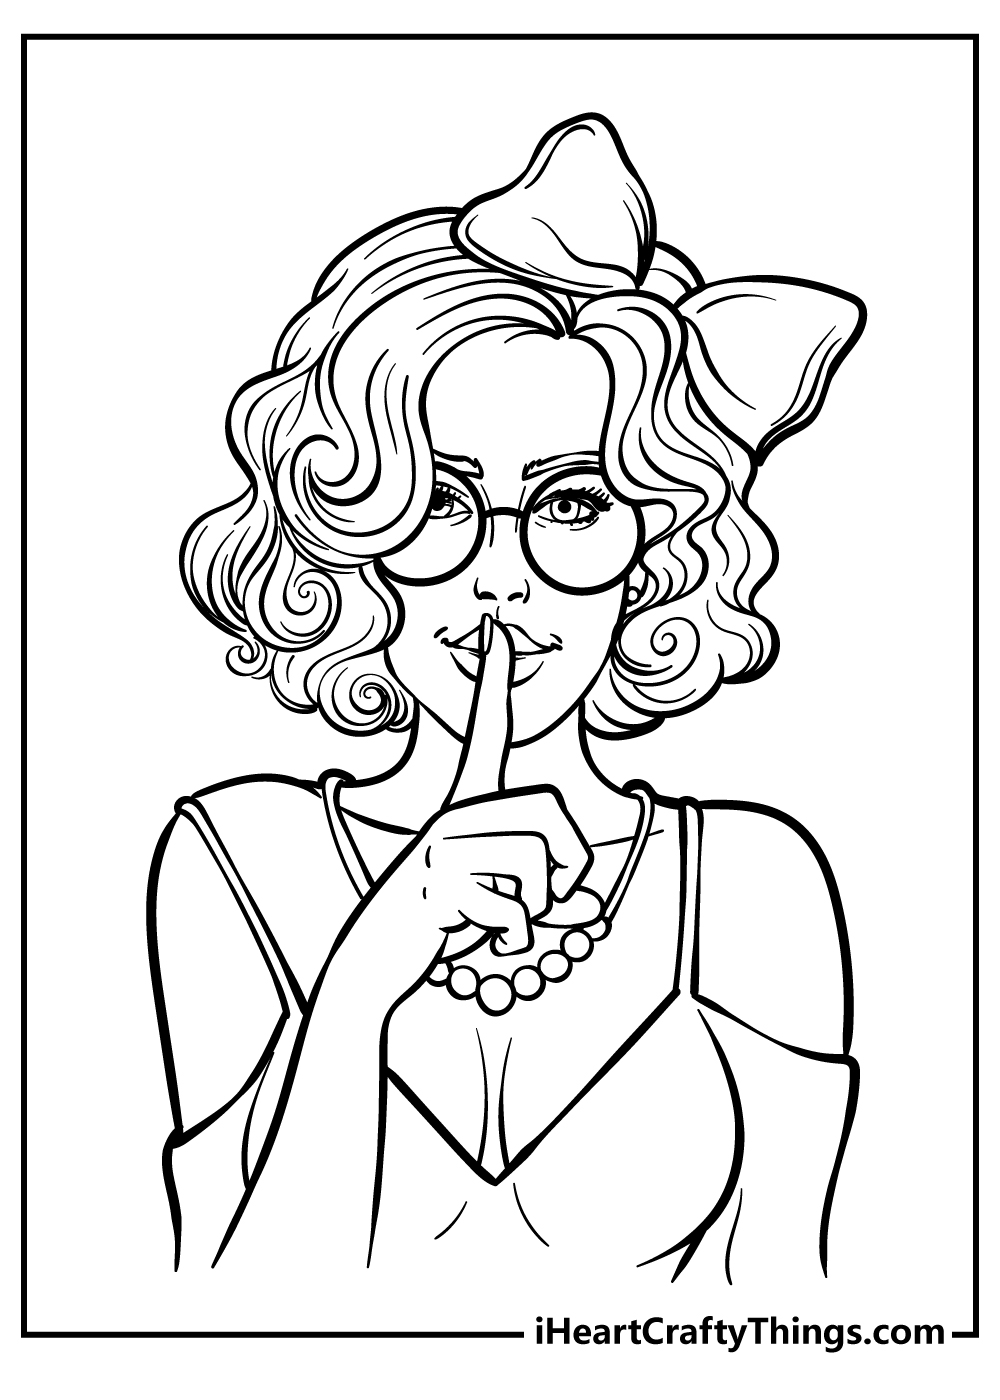 Coloring Pages For Teens free printable